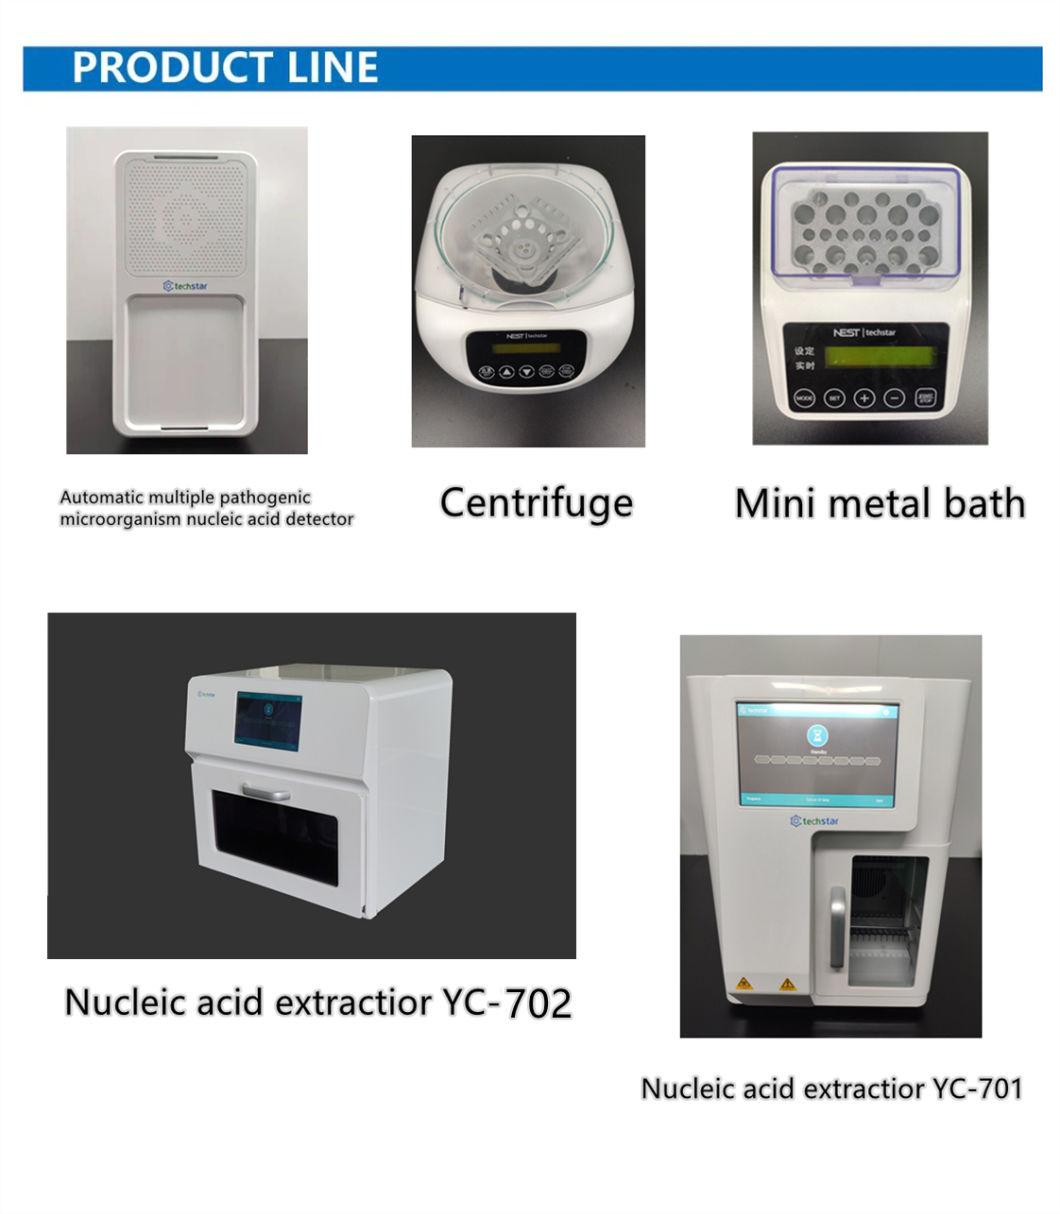 Techstar Rapid Kits Test Rna Extraction Kits, Nucleic Acid Extraction Kit Rna &DNA Purification Rapid Test Kits